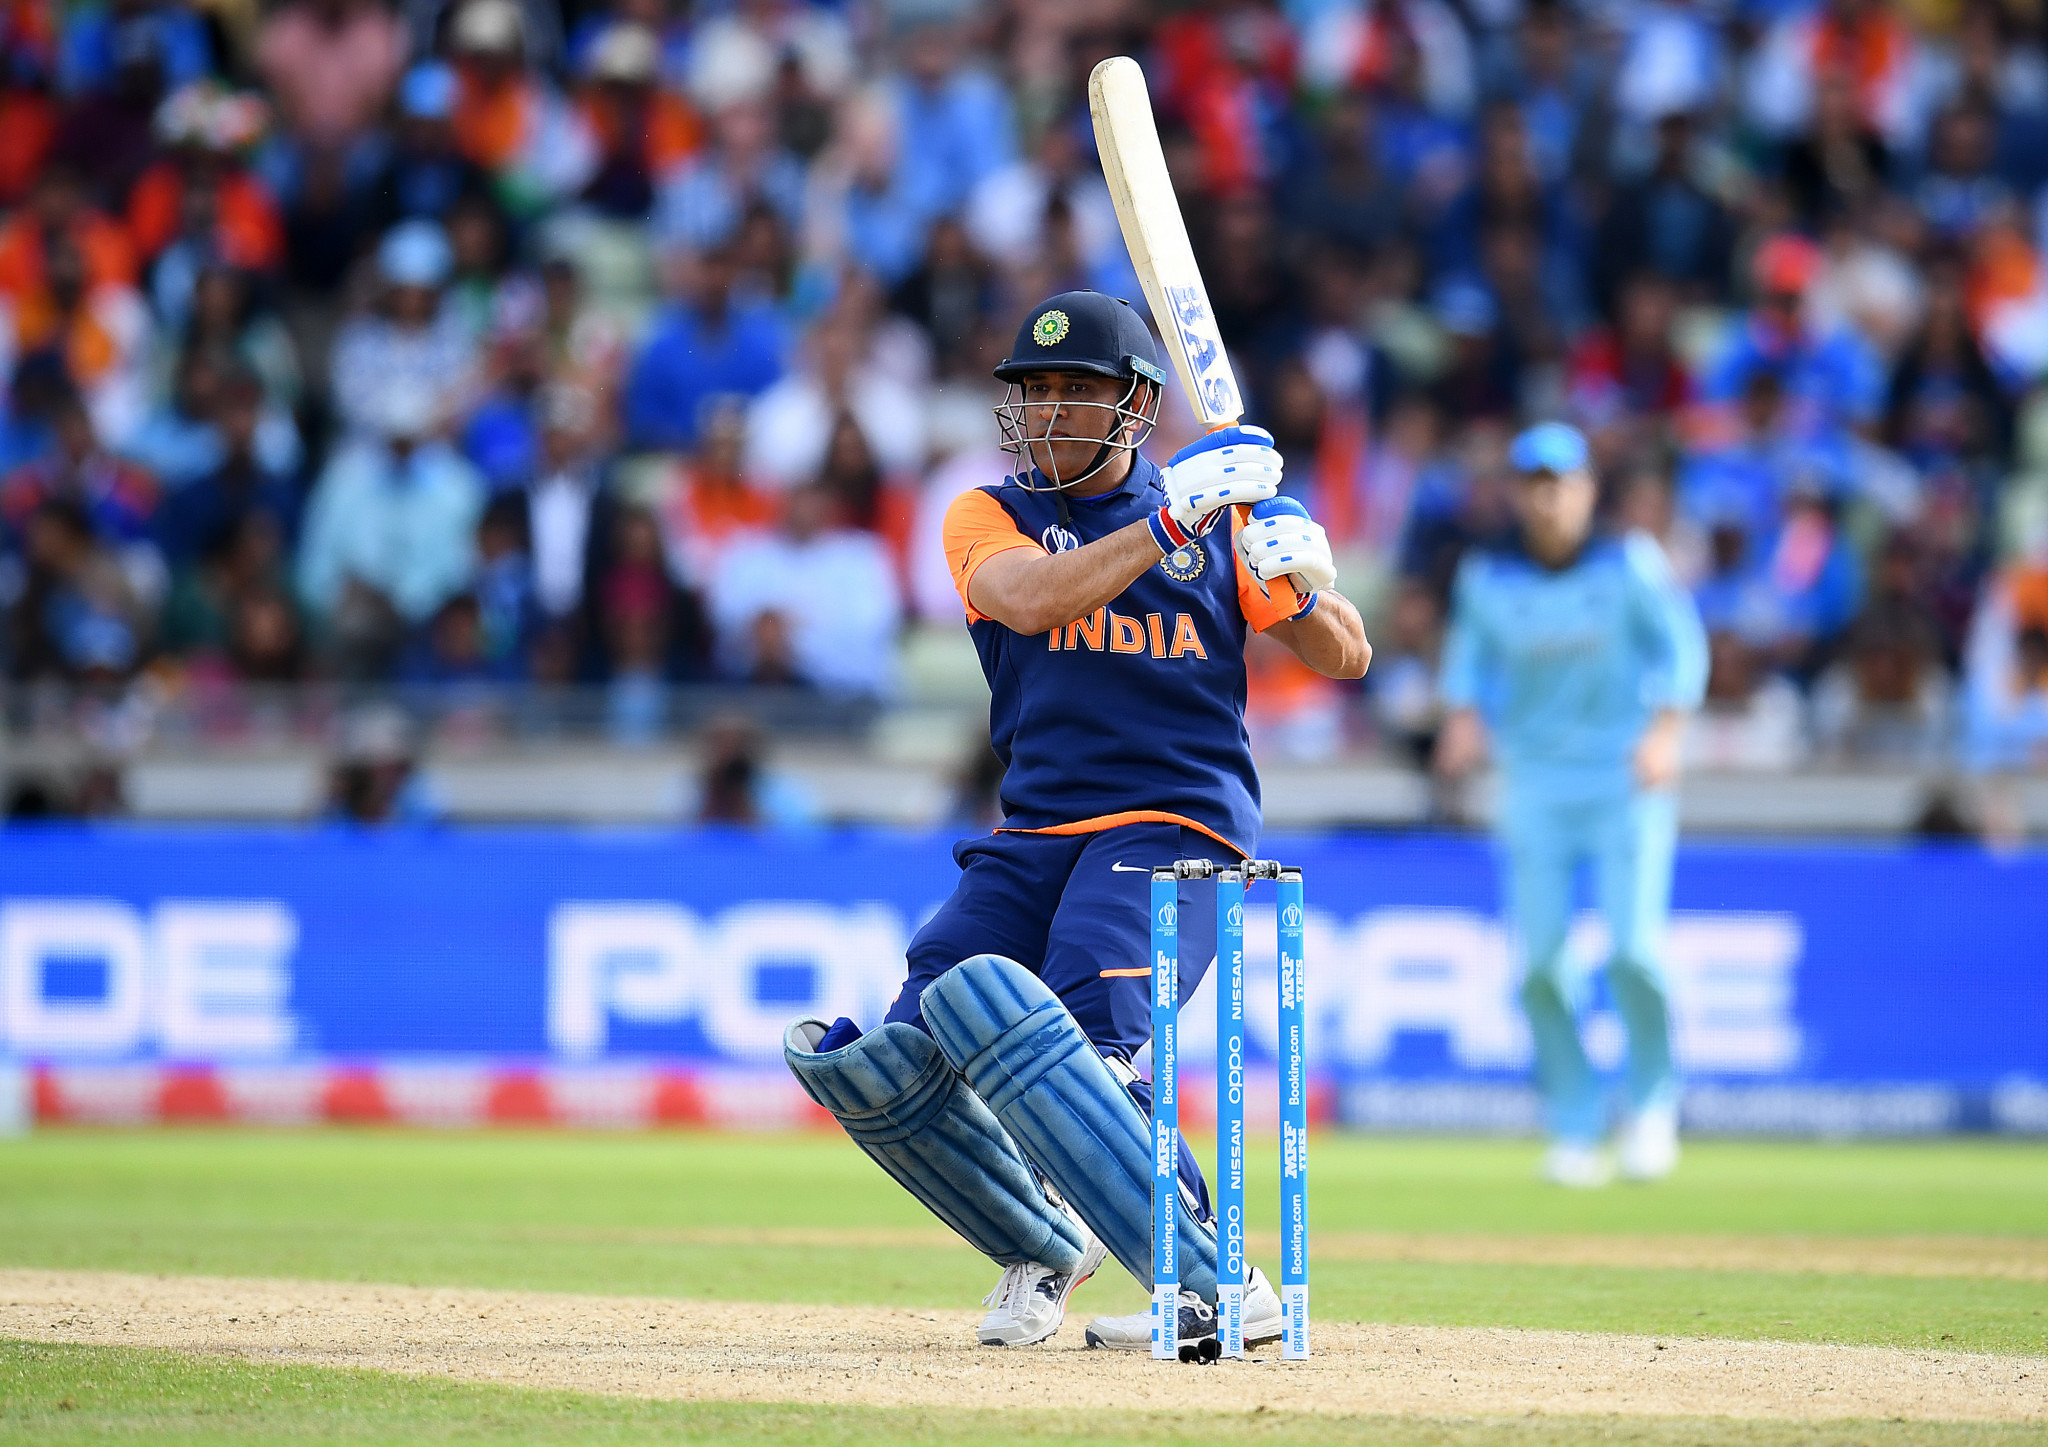 There was criticism of India's MS Dhoni after his side lost by 31 runs to England at Edgbaston in Birmingham – denting Pakistan's chances of reaching the semi-finals ©Getty Images